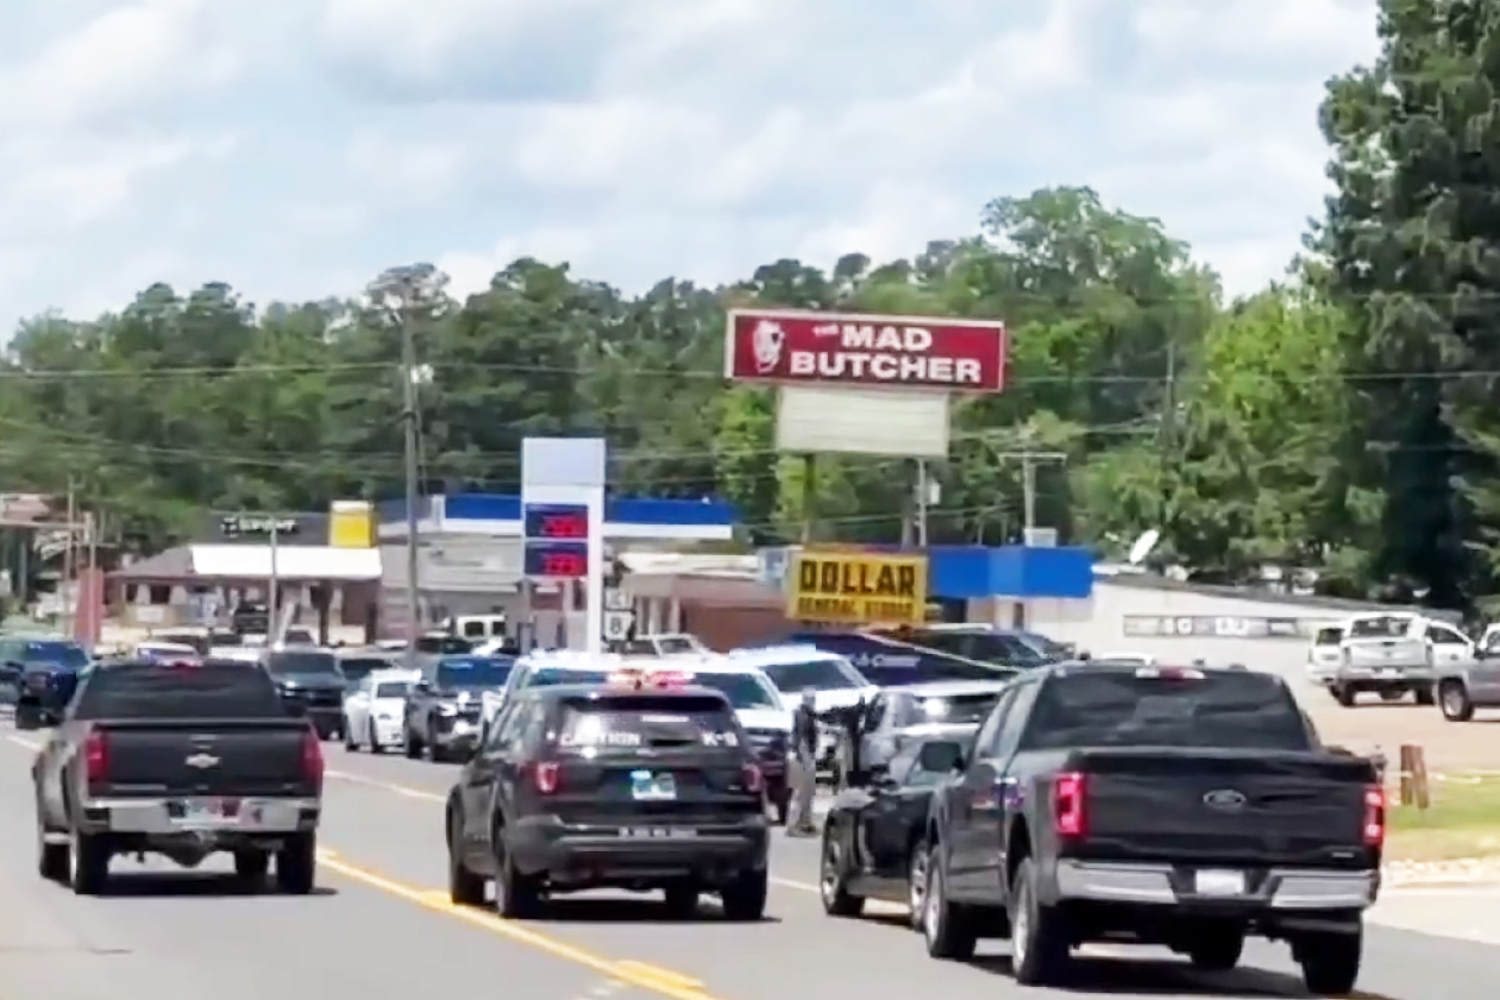 2 dead, multiple wounded in shooting at Mad Butcher grocery store in Arkansas